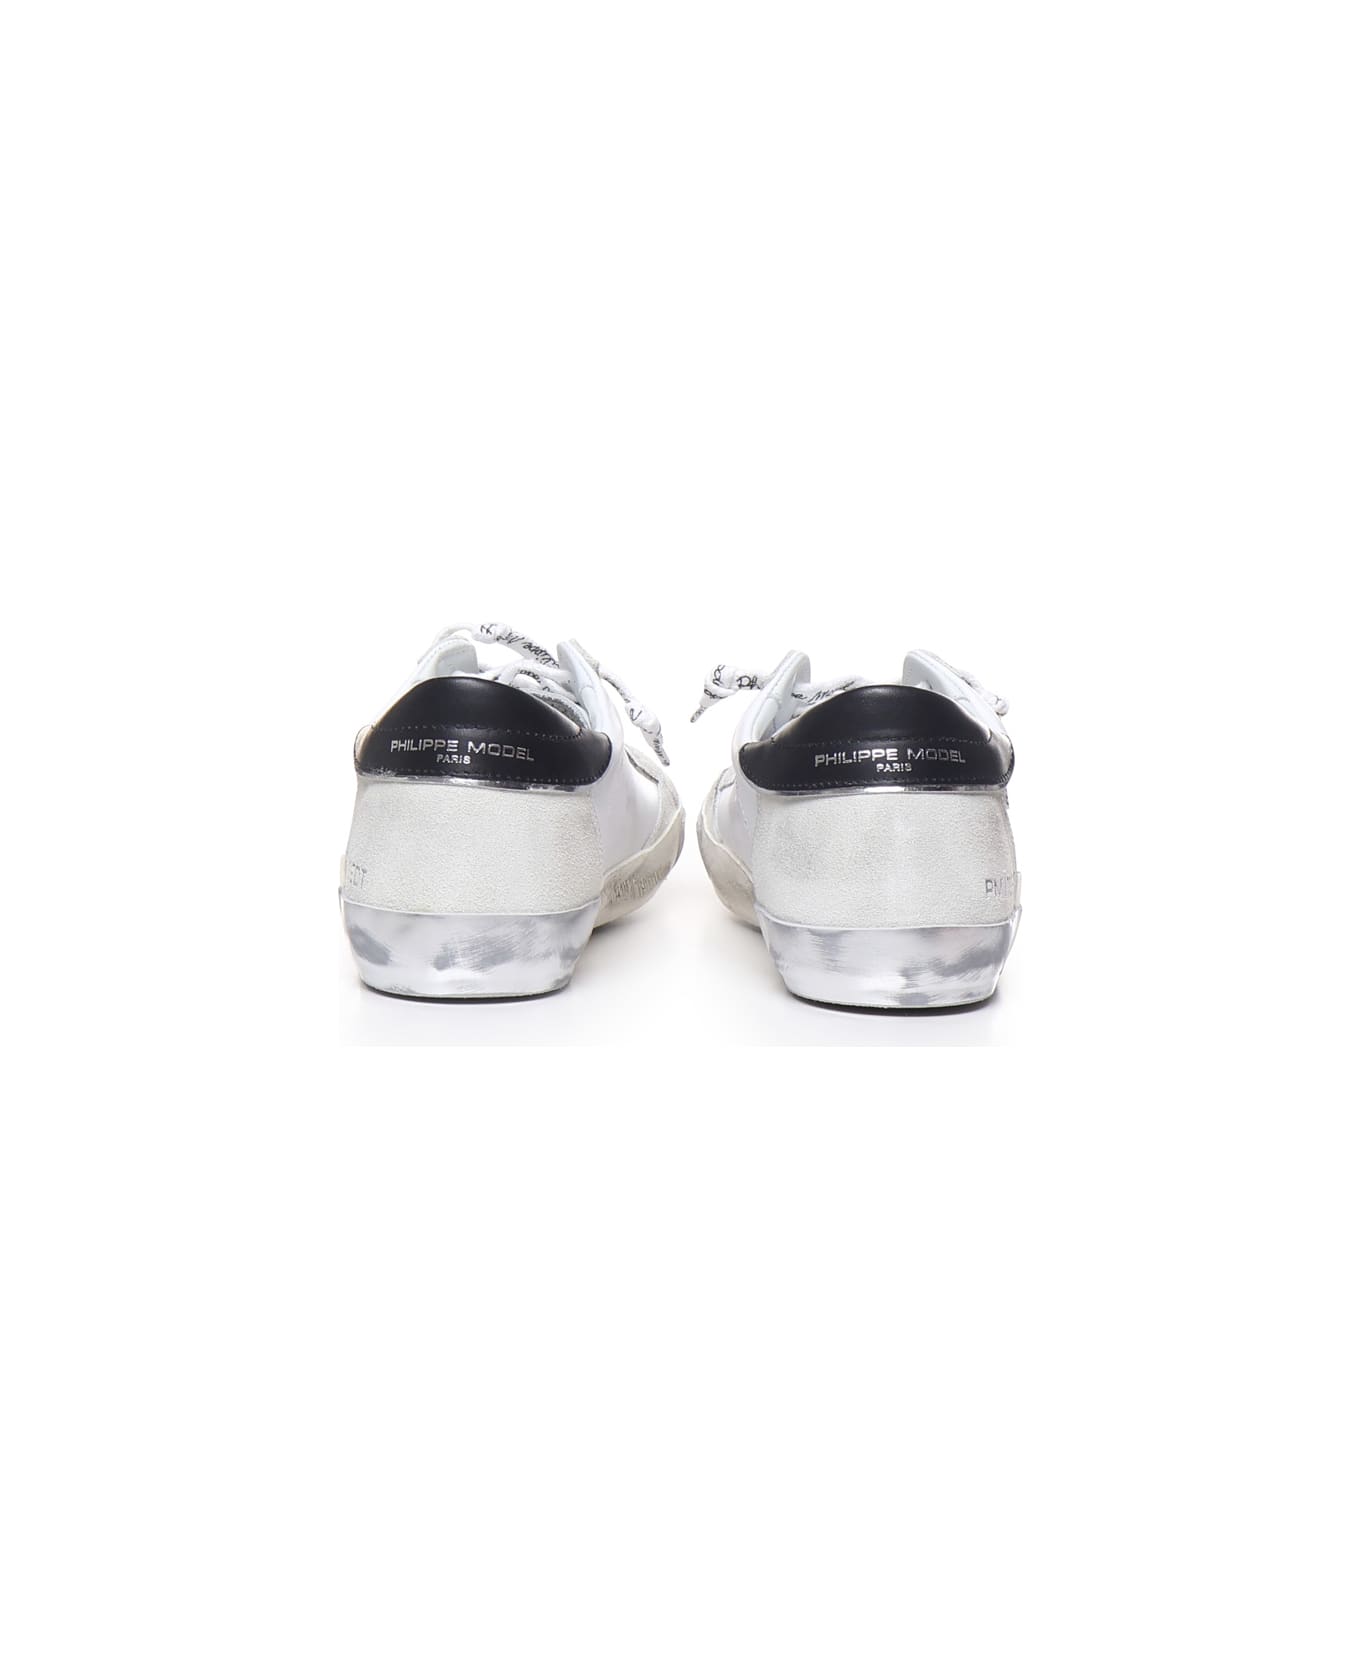 Philippe Model Parisx Sneakers In Leather With Contrasting Heel Tab - White/silver